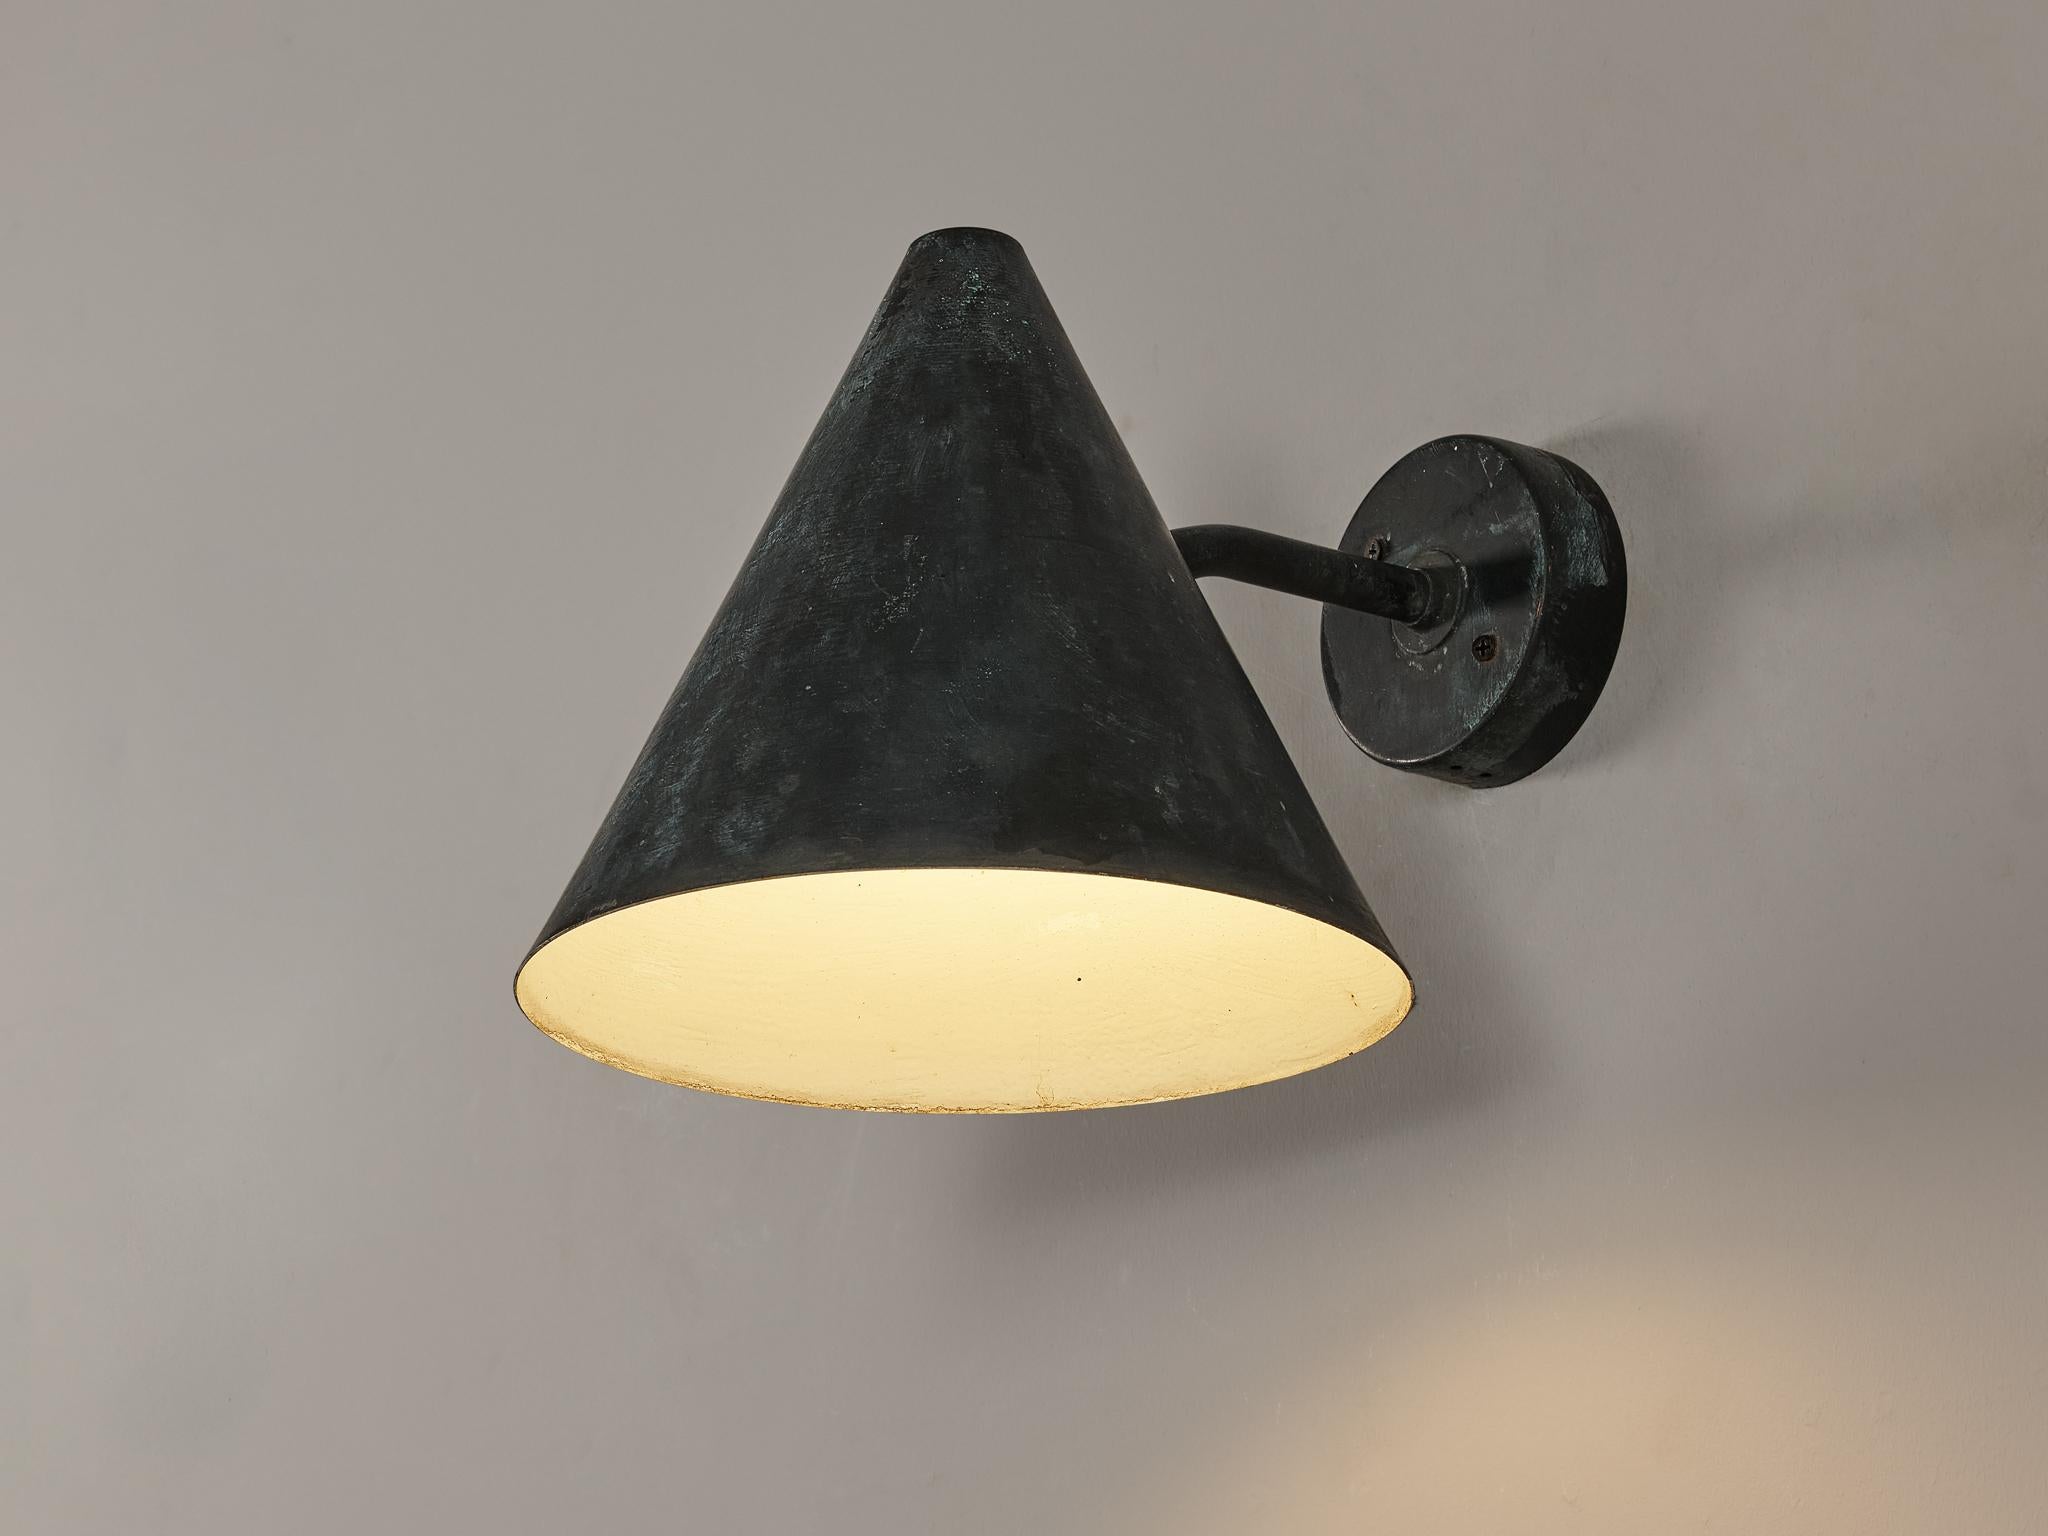 Swedish Hans-Agne Jakobsson 'Tratten' Wall Lights in Patinated Copper